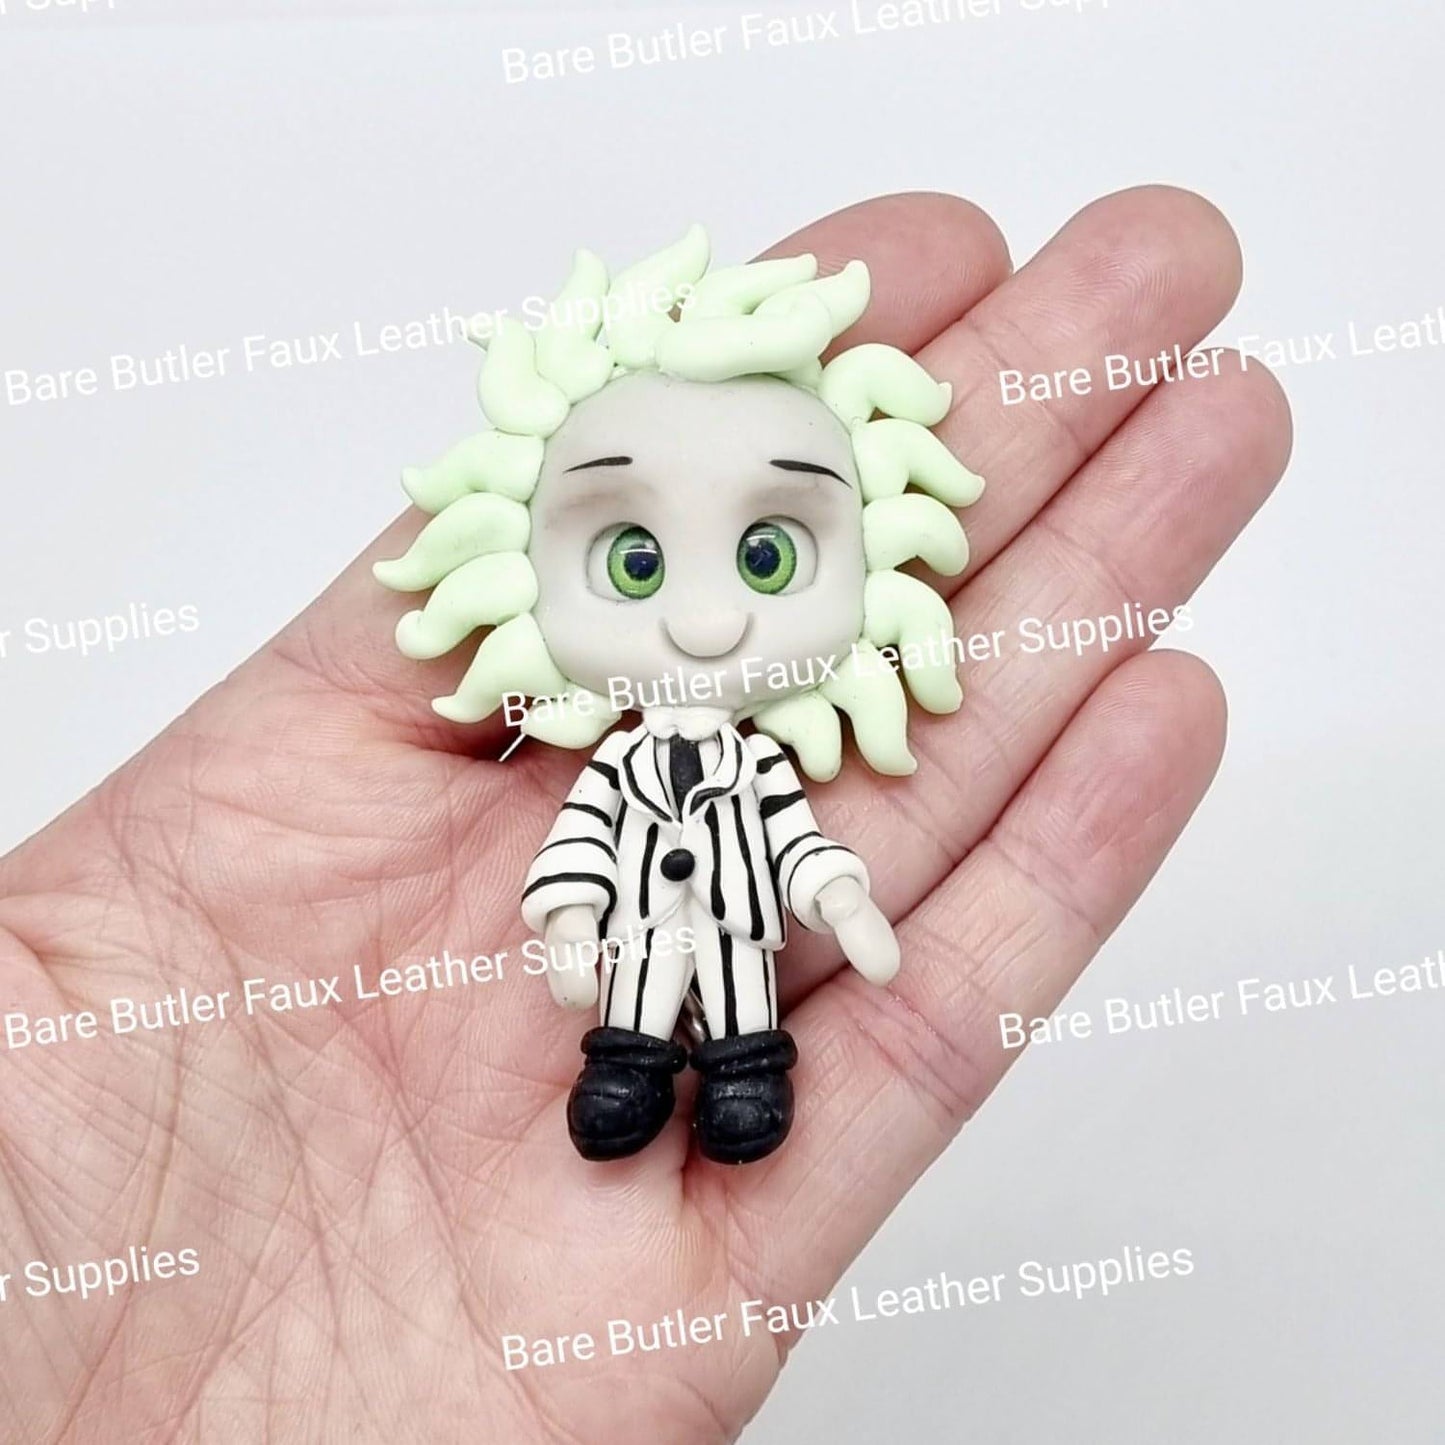 Green Hair Man - Bare Butler Faux Leather Supplies 